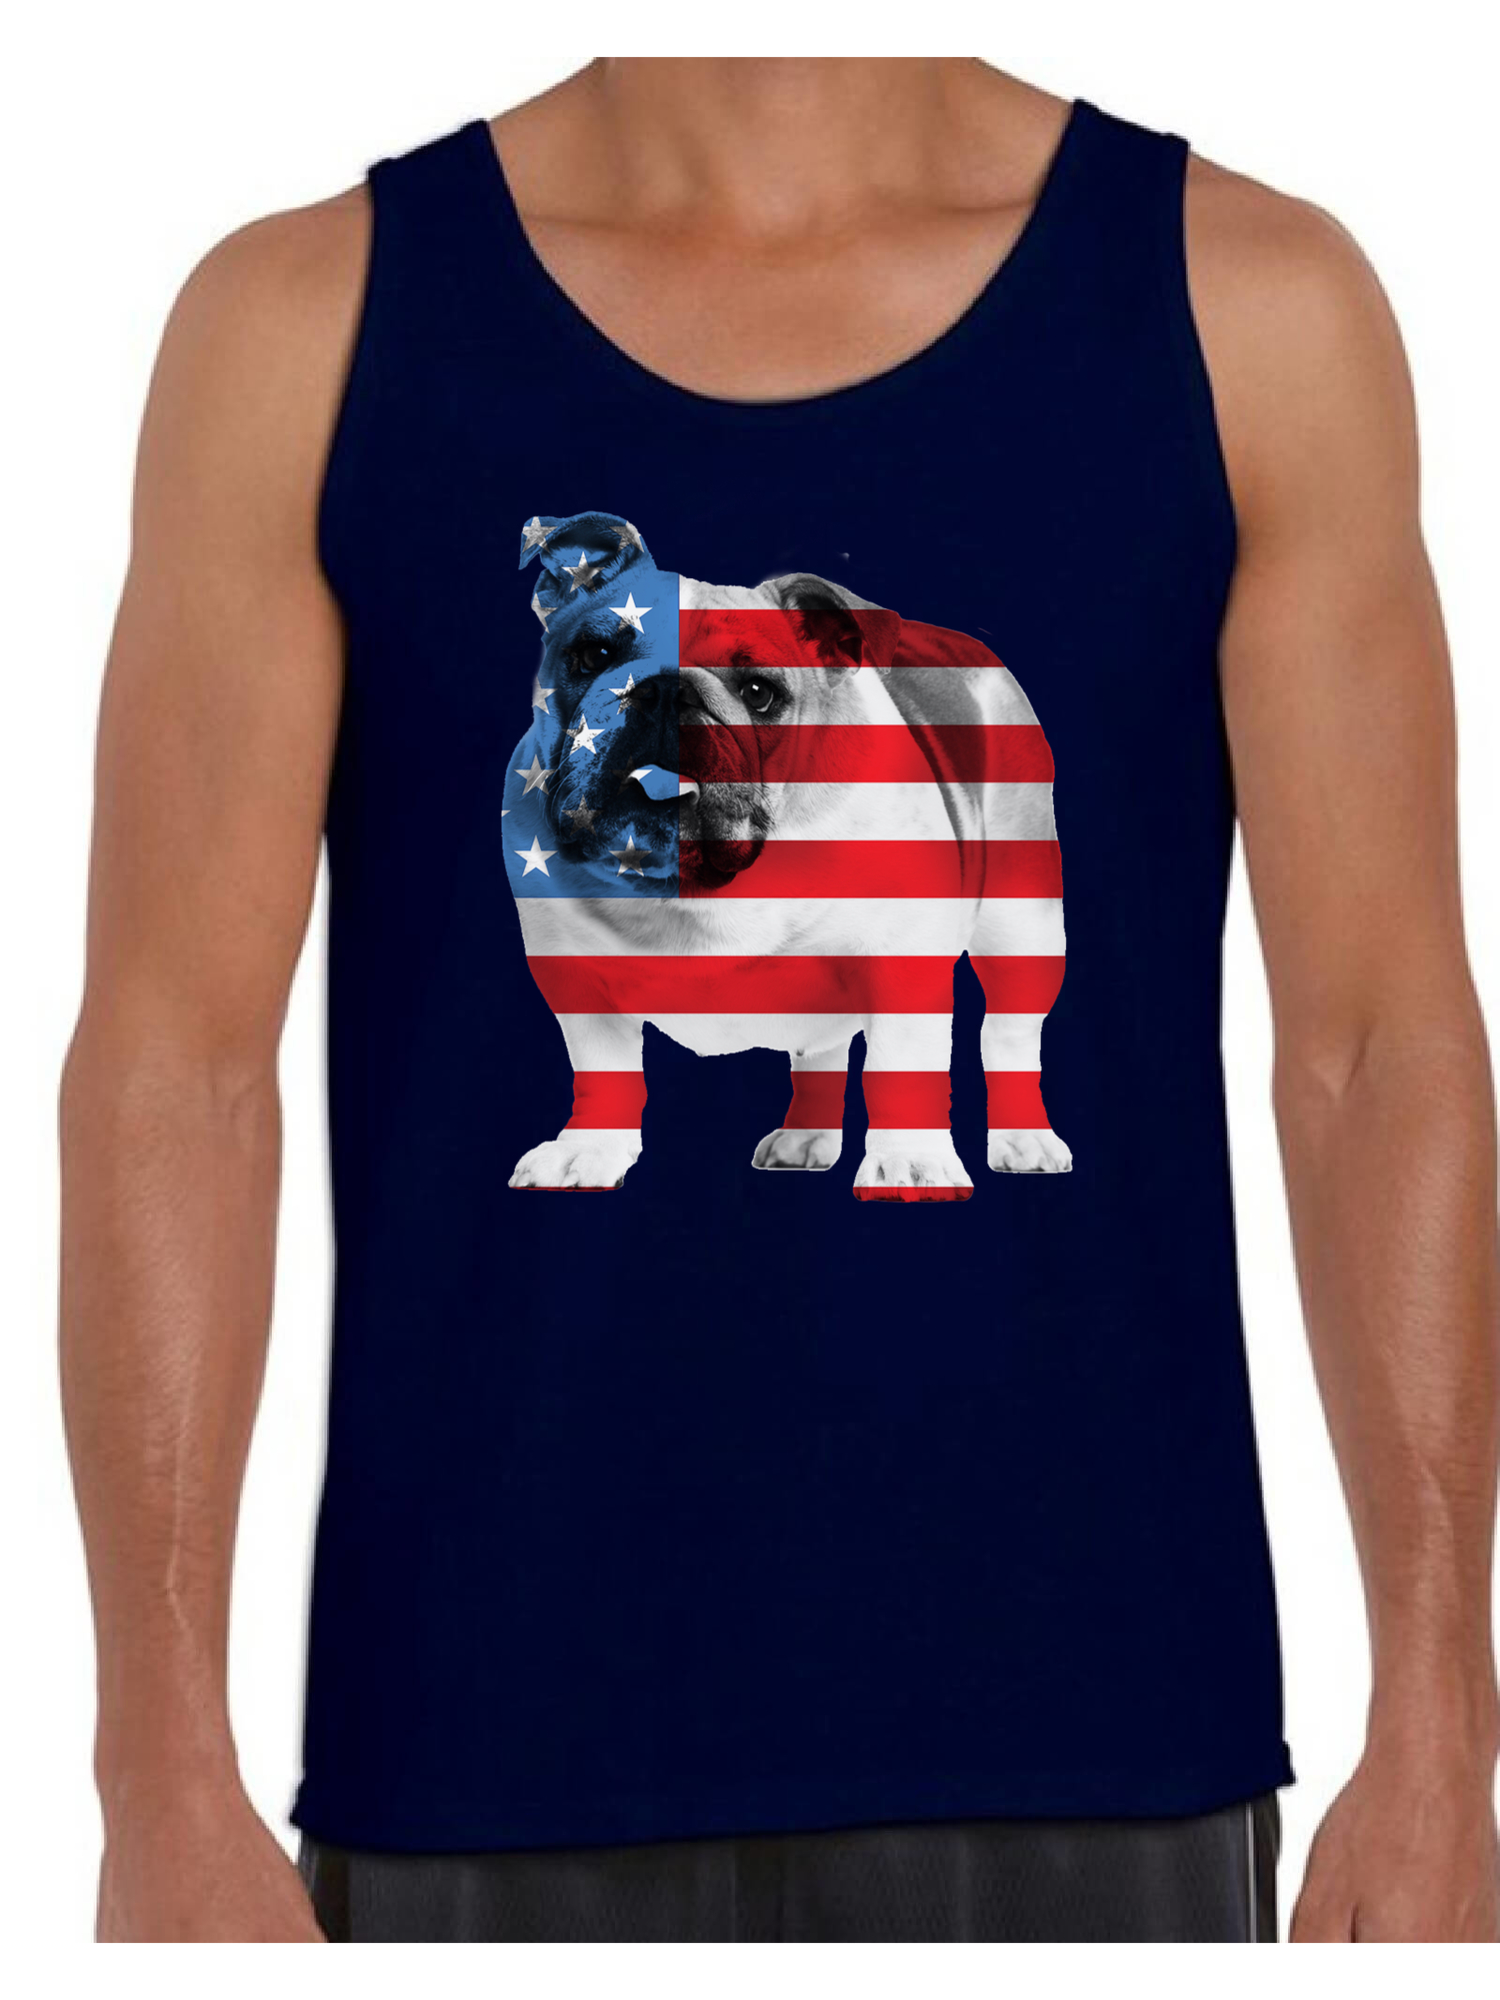 Awkward Styles American Flag Tank Tops Bulldog American Patriotic Tank Top for Men USA Flag Tanks 4th Of July Gifts for Dog Owners Bulldog Lover Tops Red White and Blue Patriotic Outfit - image 1 of 4